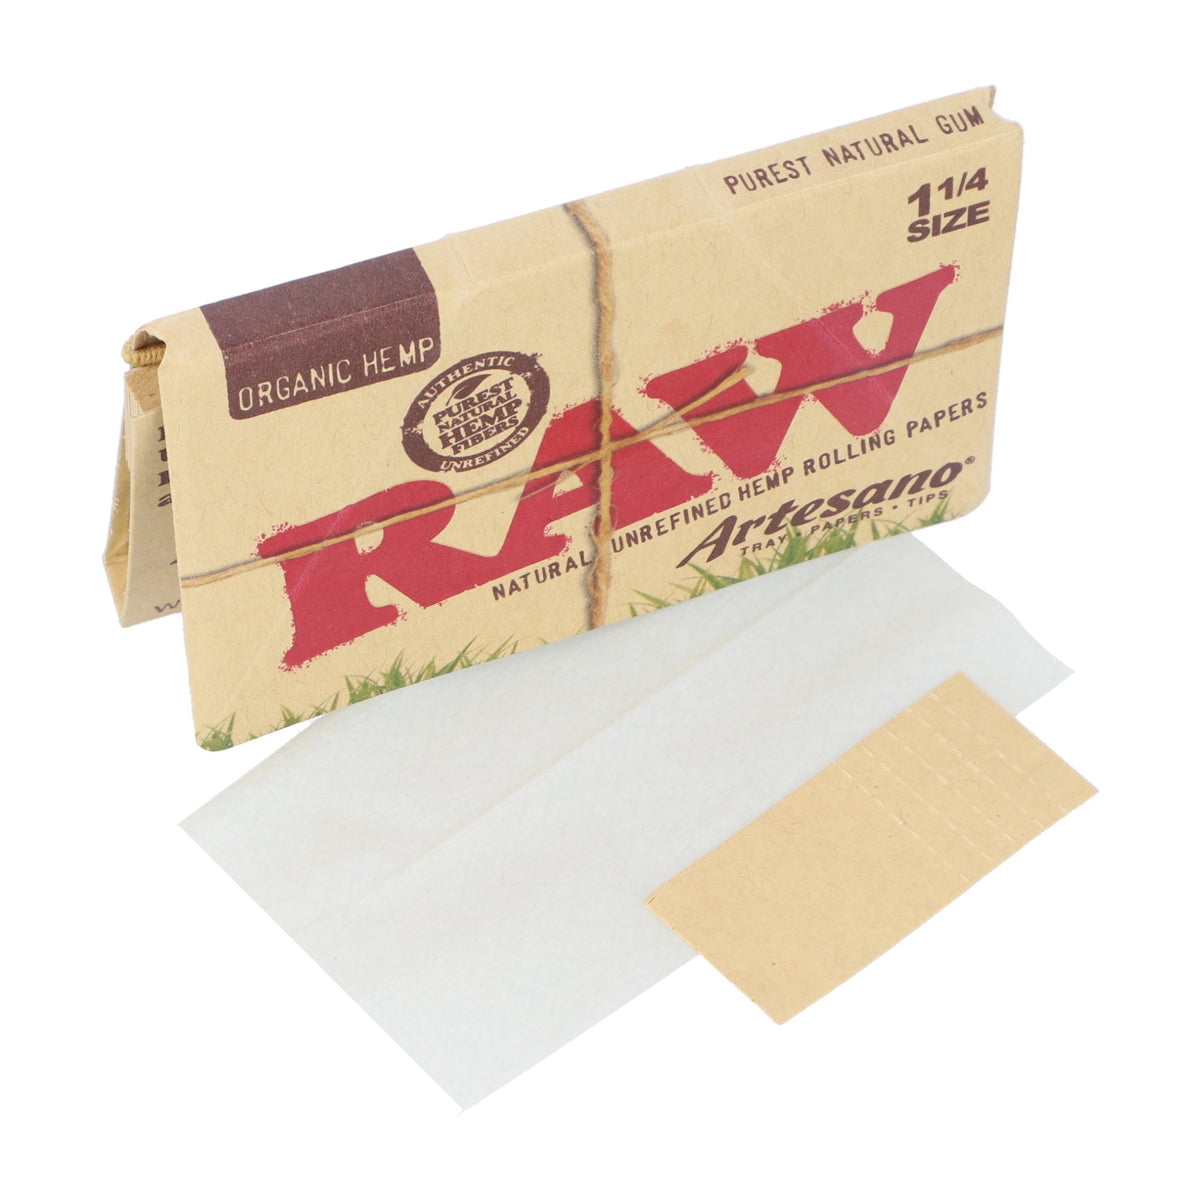 RAW Organic Hemp Artesano 1 1/4 Rolling Papers Rolling Papers esd-official